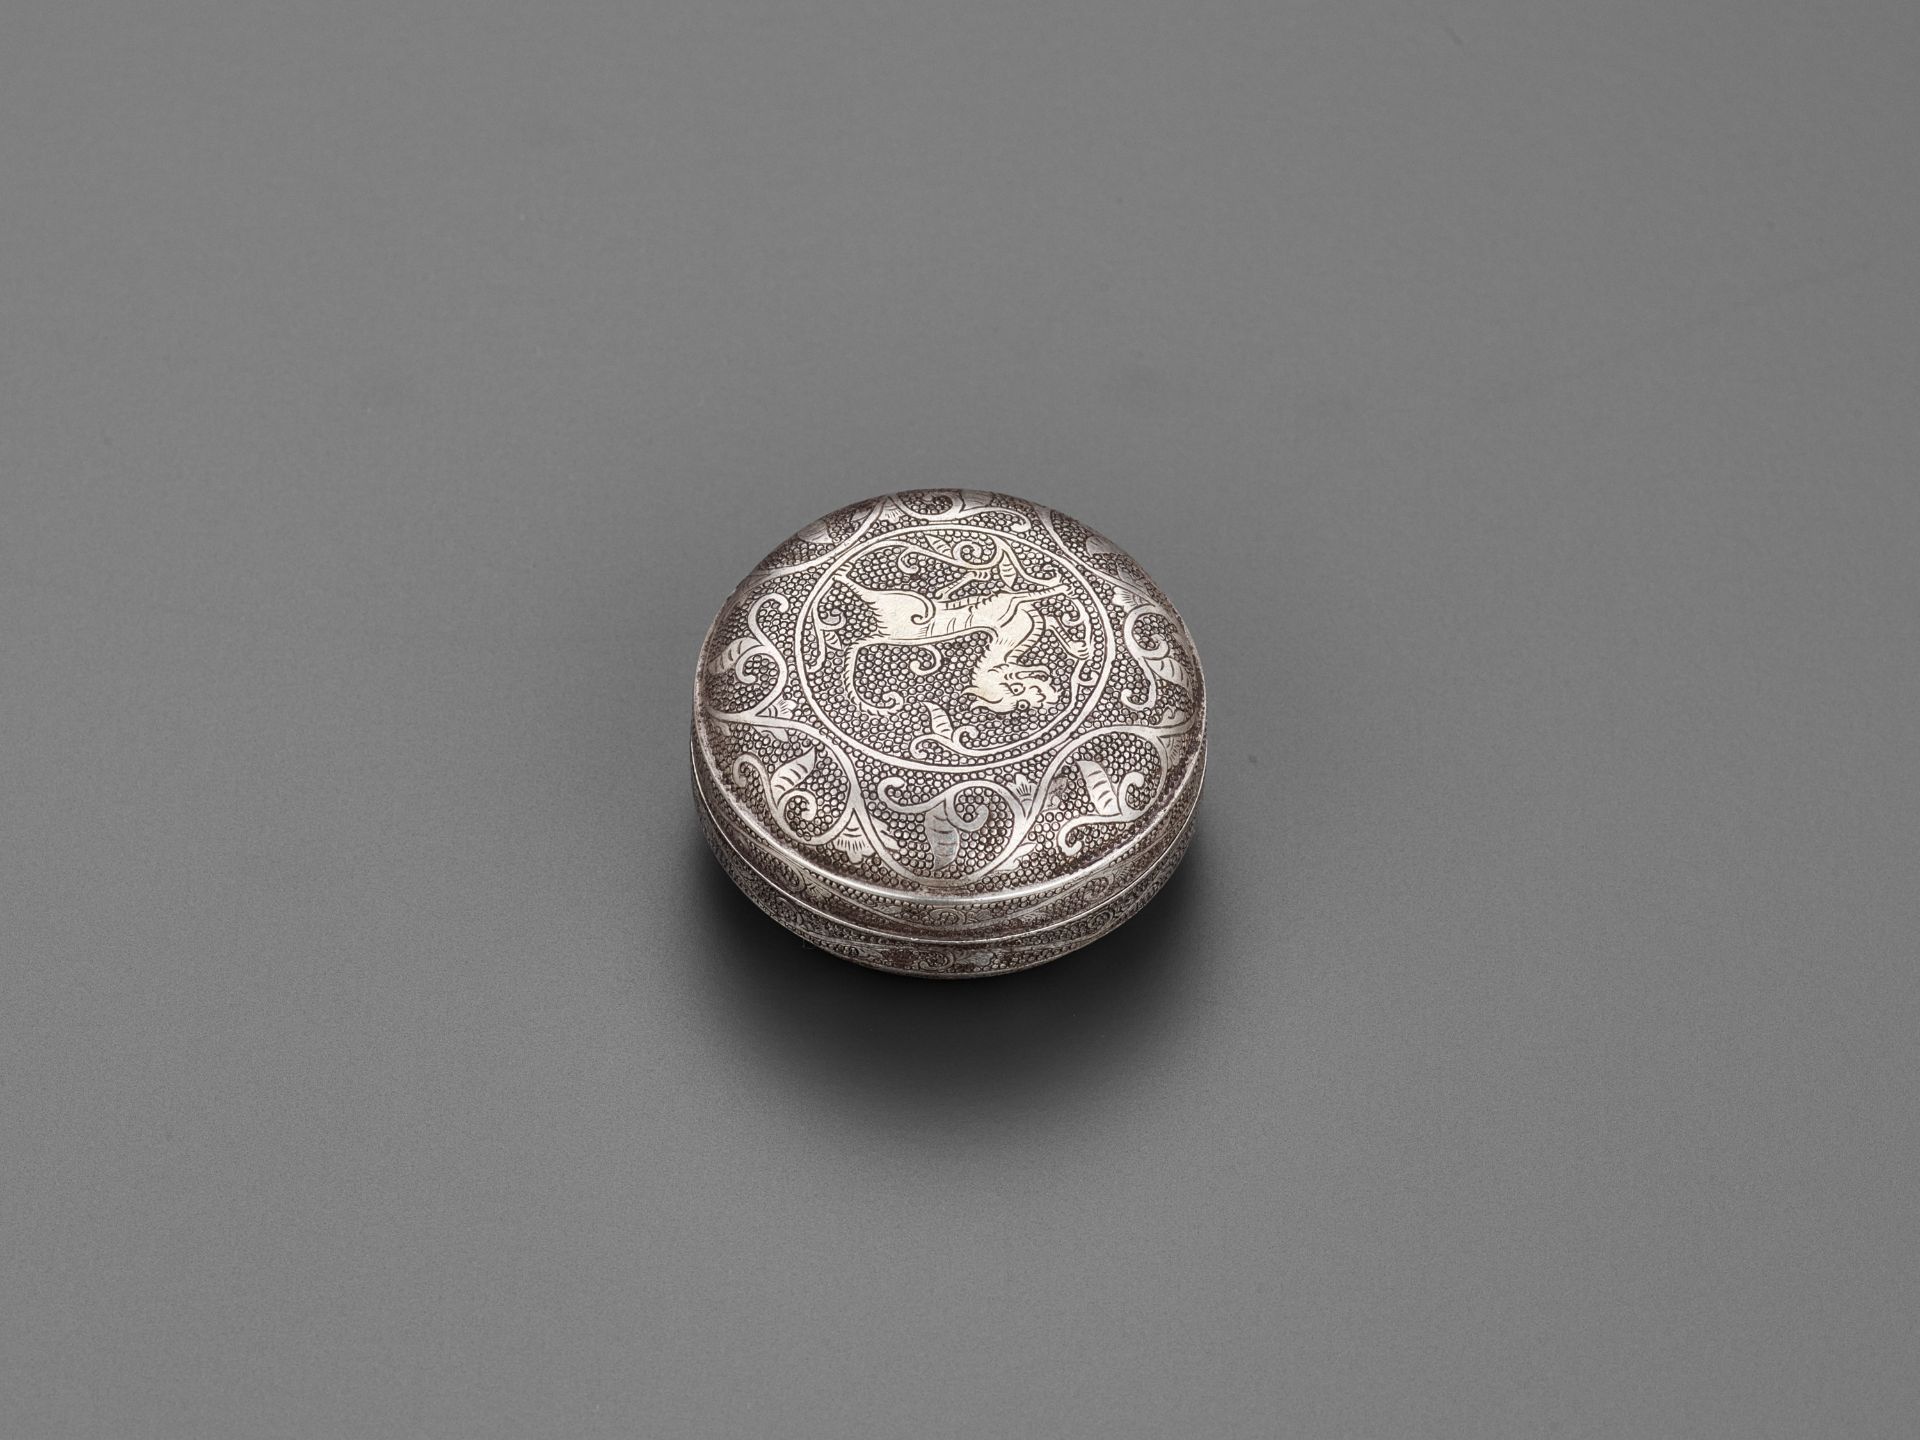 A 'MANDARIN DUCK' SILVER BOX AND COVER, TANG DYNASTY - Image 14 of 19